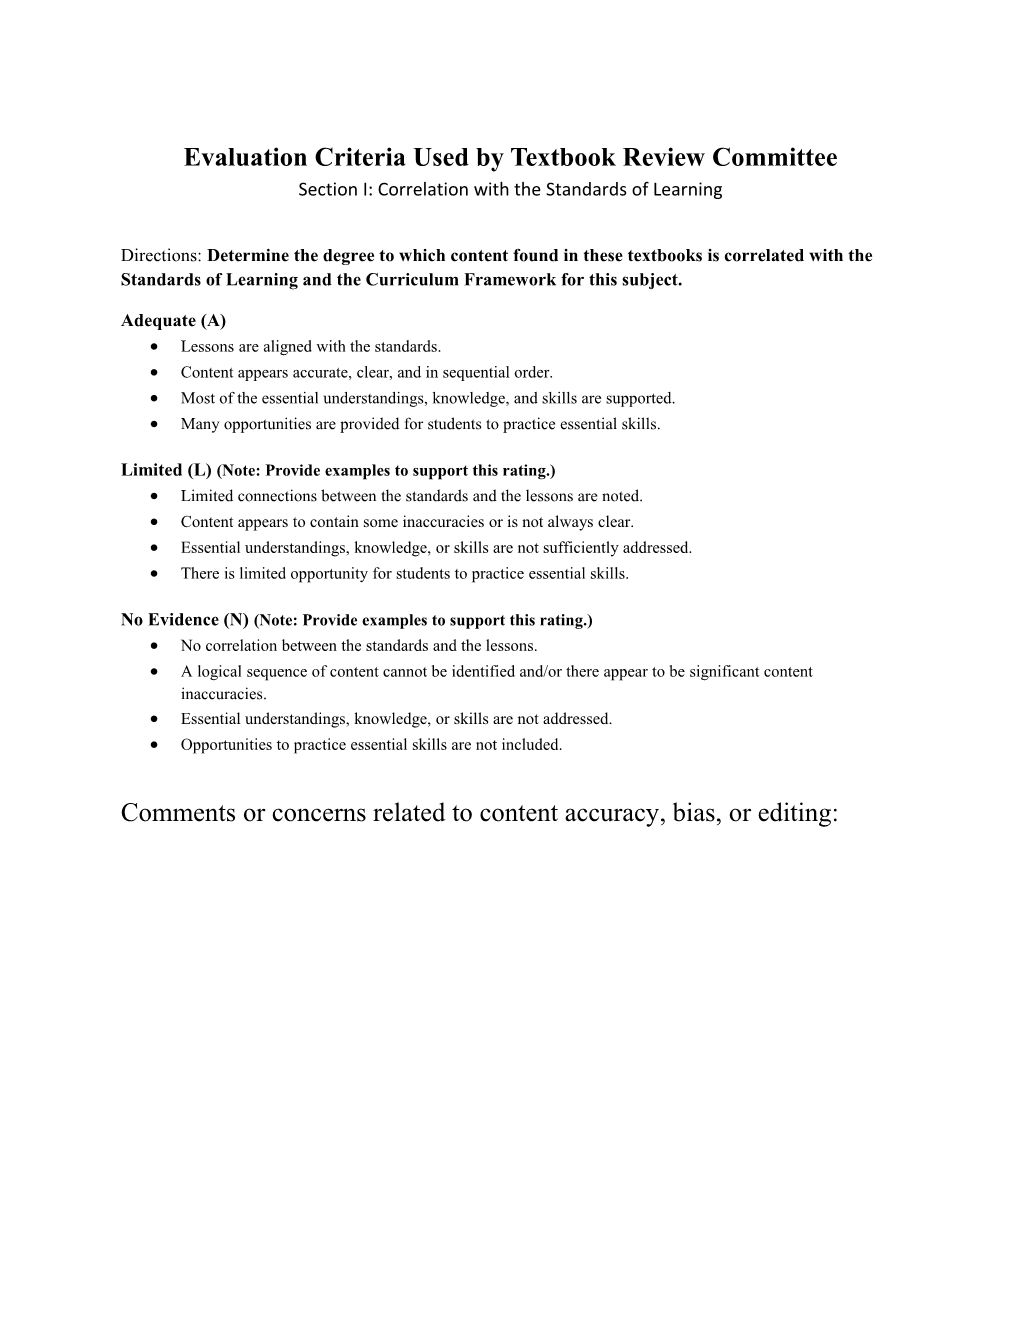 Evaluation Criteria Used by Textbook Review Committee